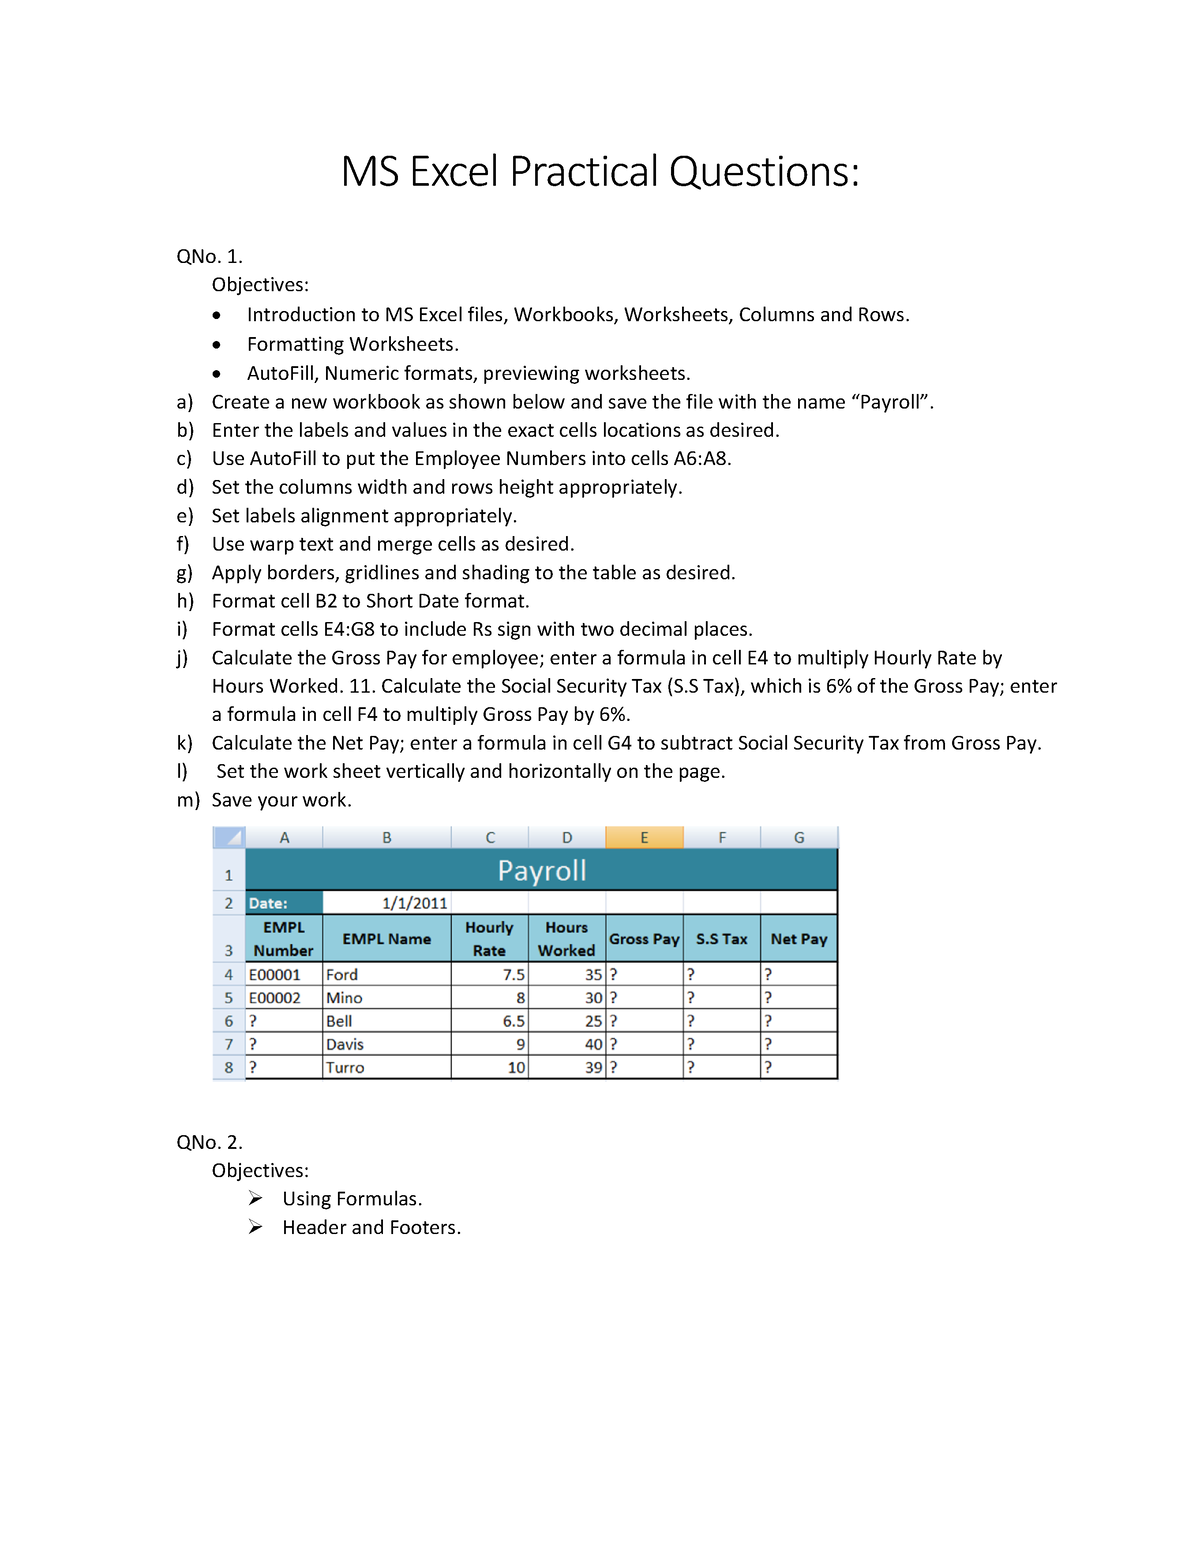 ms-excel-practical-questions-for-learners-ms-excel-practical